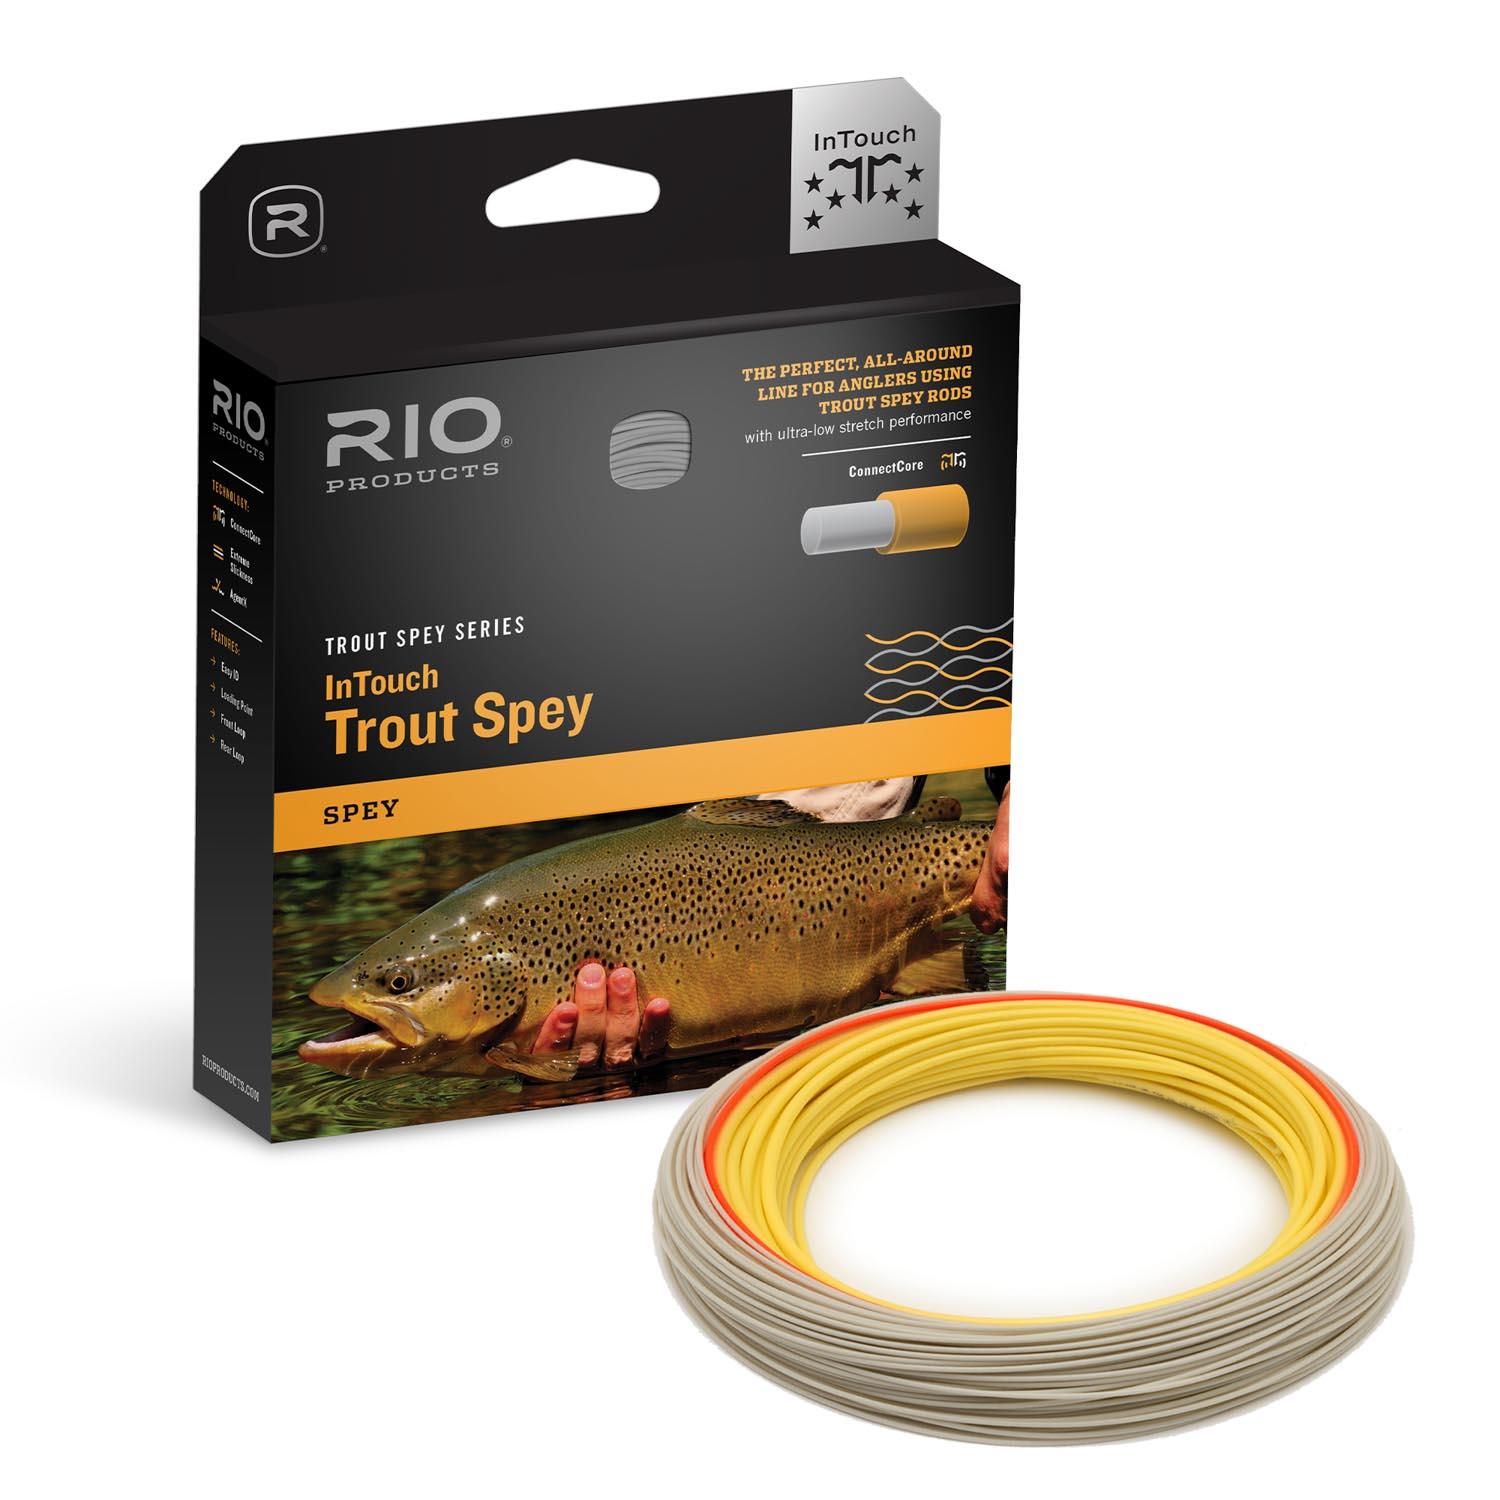 InTouch Trout Spey Box + Spool